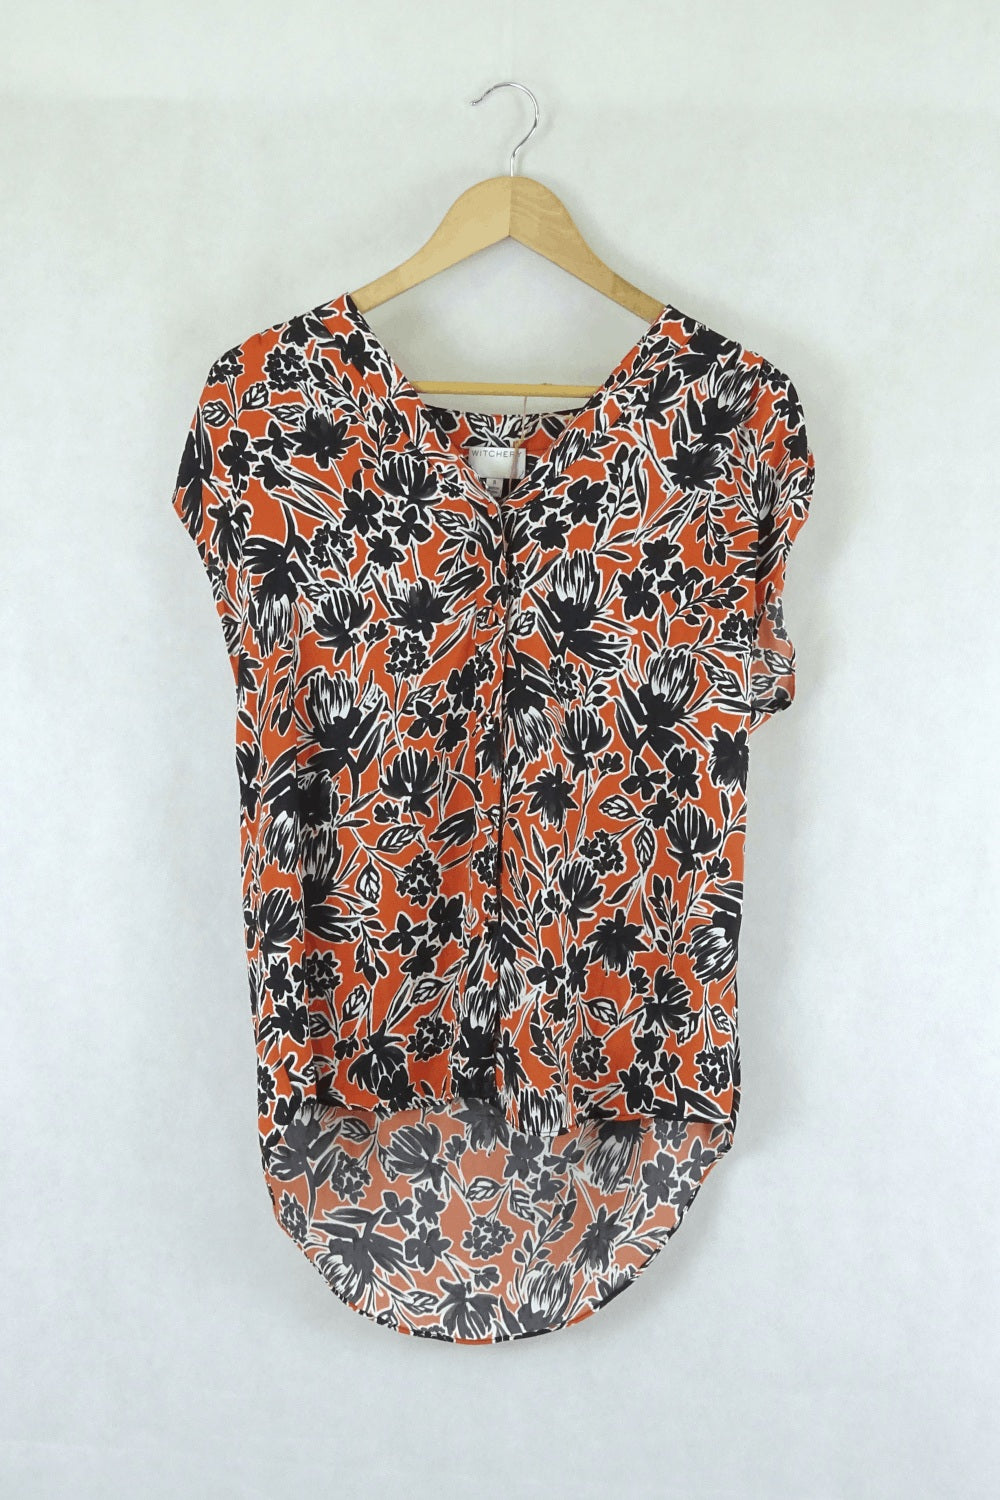 Witchery Coral Floral Print Sleeveless Blouse 8